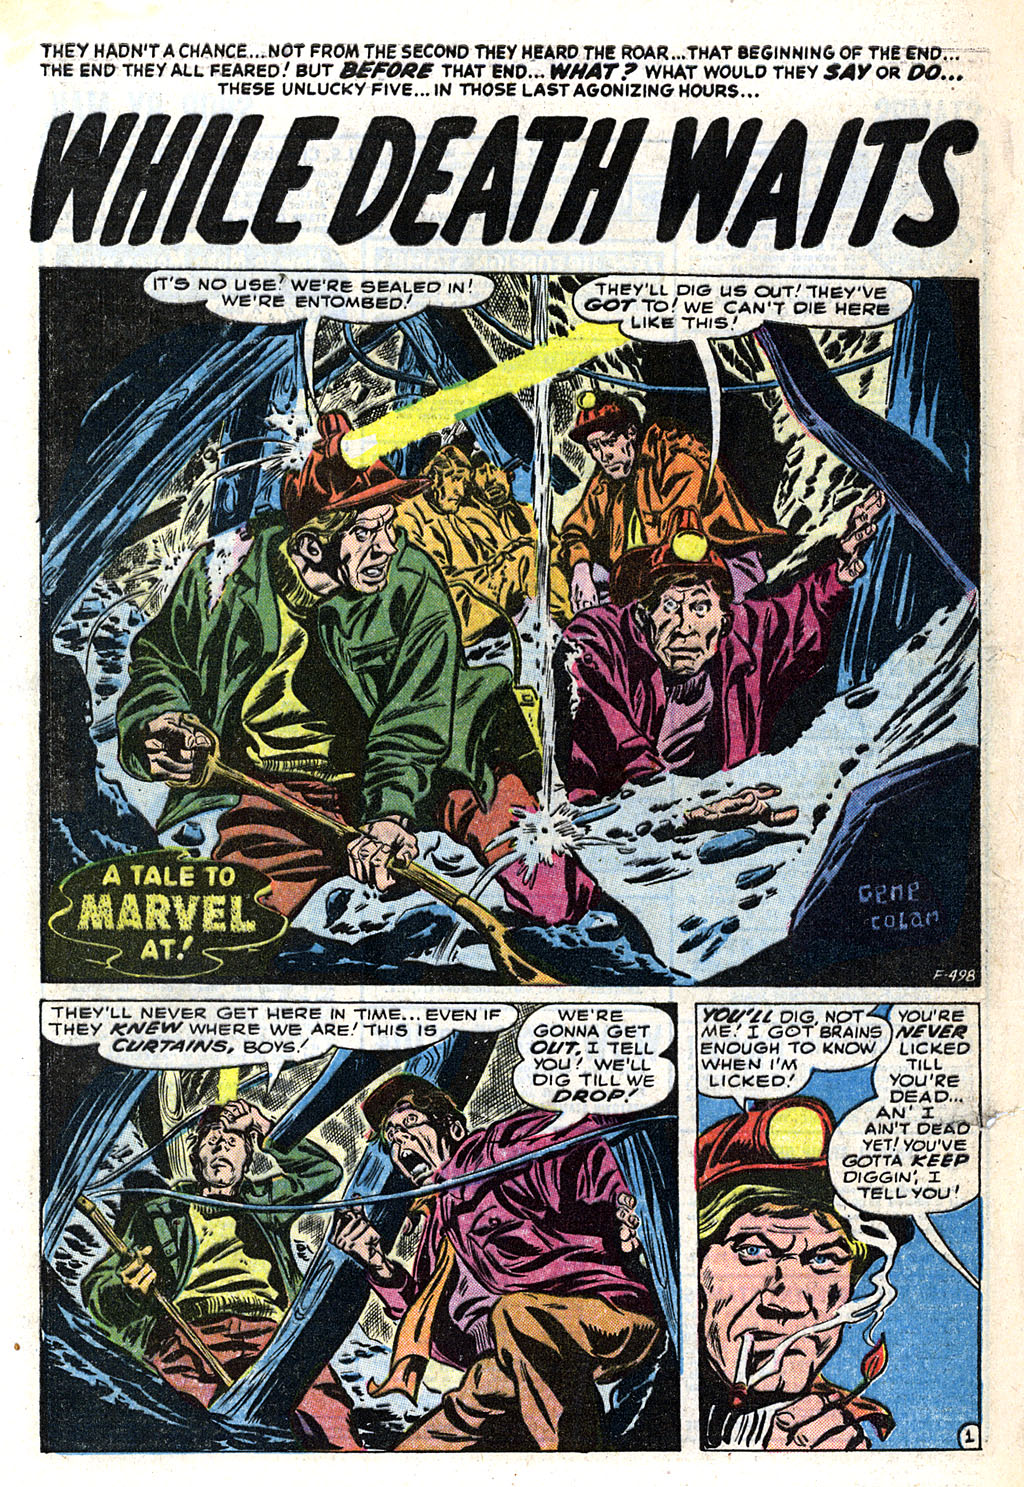 Marvel Tales (1949) 131 Page 27